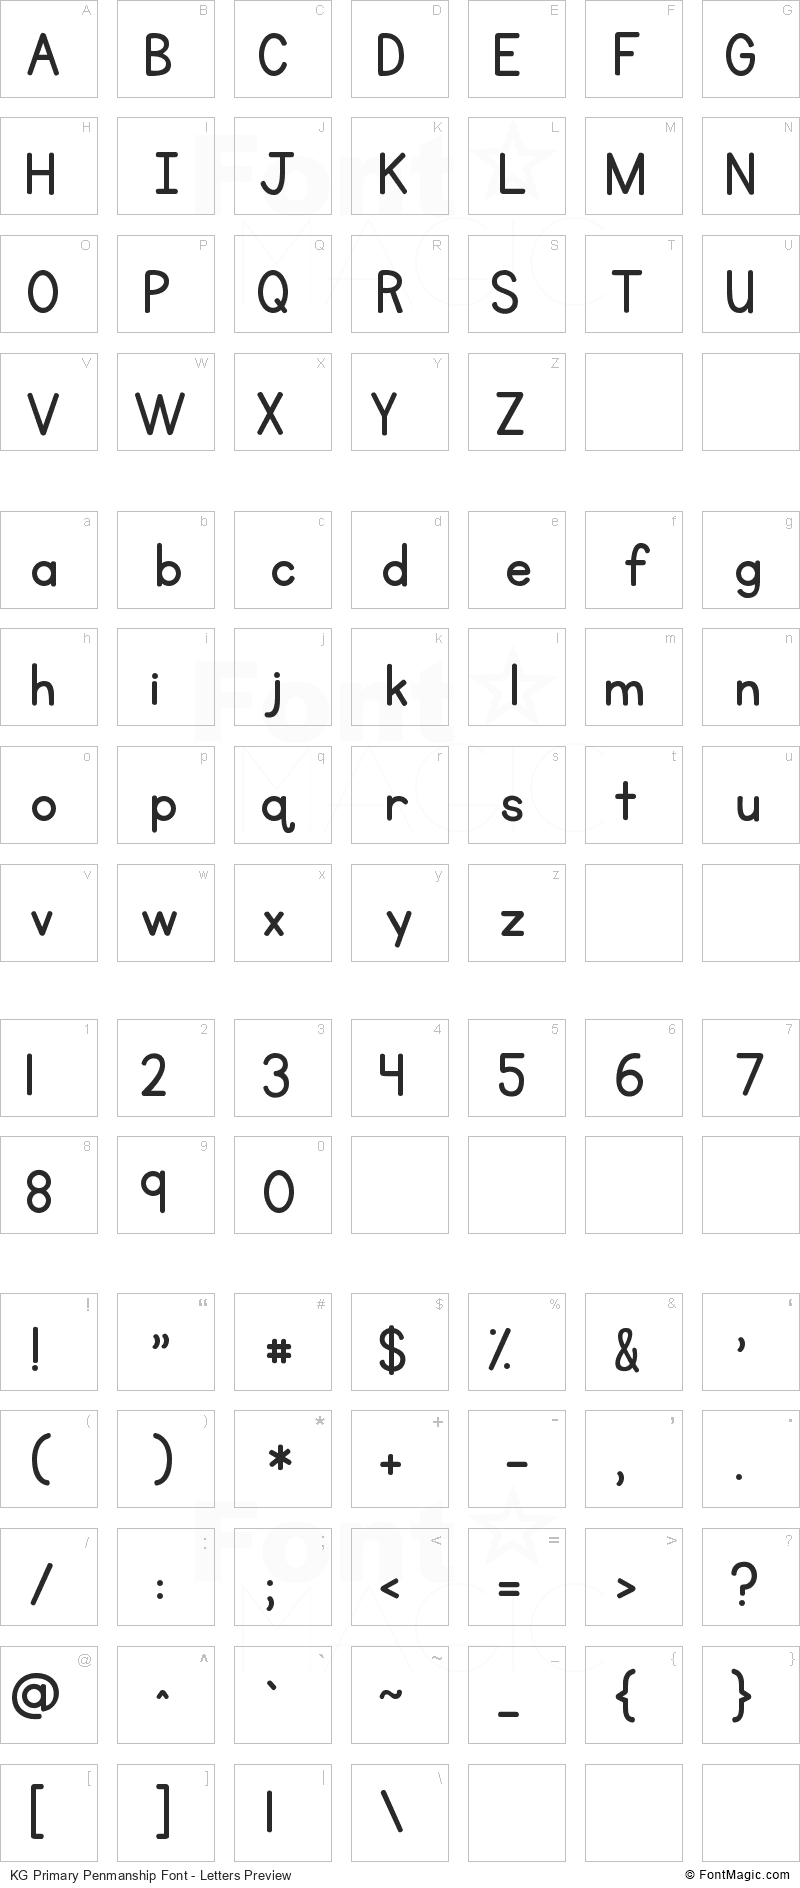 KG Primary Penmanship Font - All Latters Preview Chart